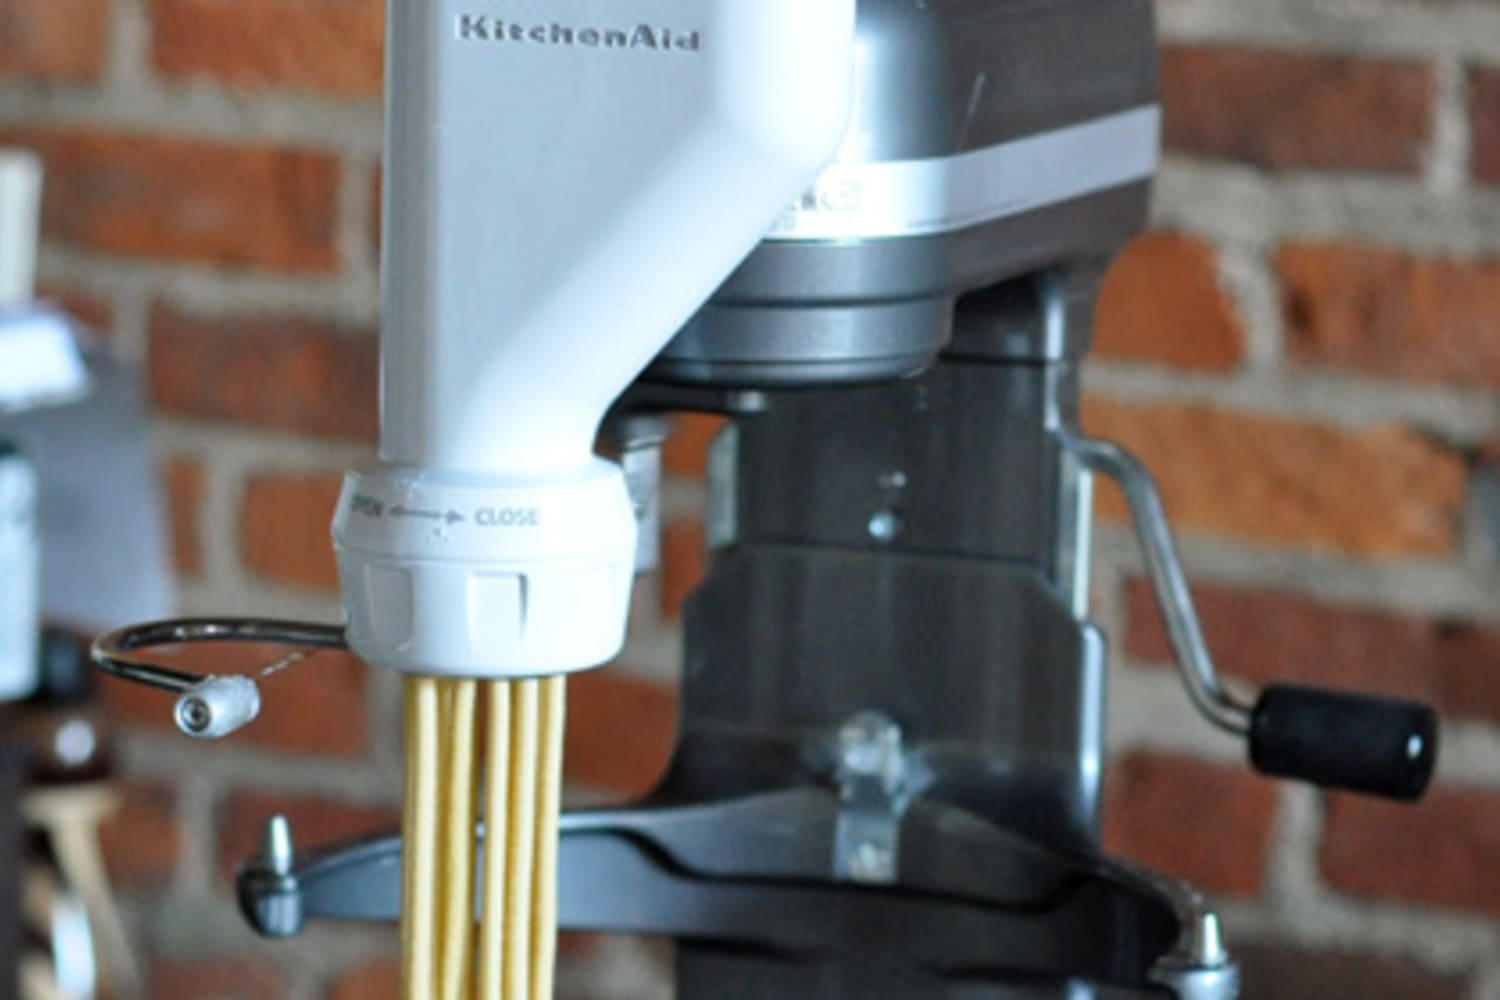 KitchenAid pasta maker review: A simple tool for beginners (or